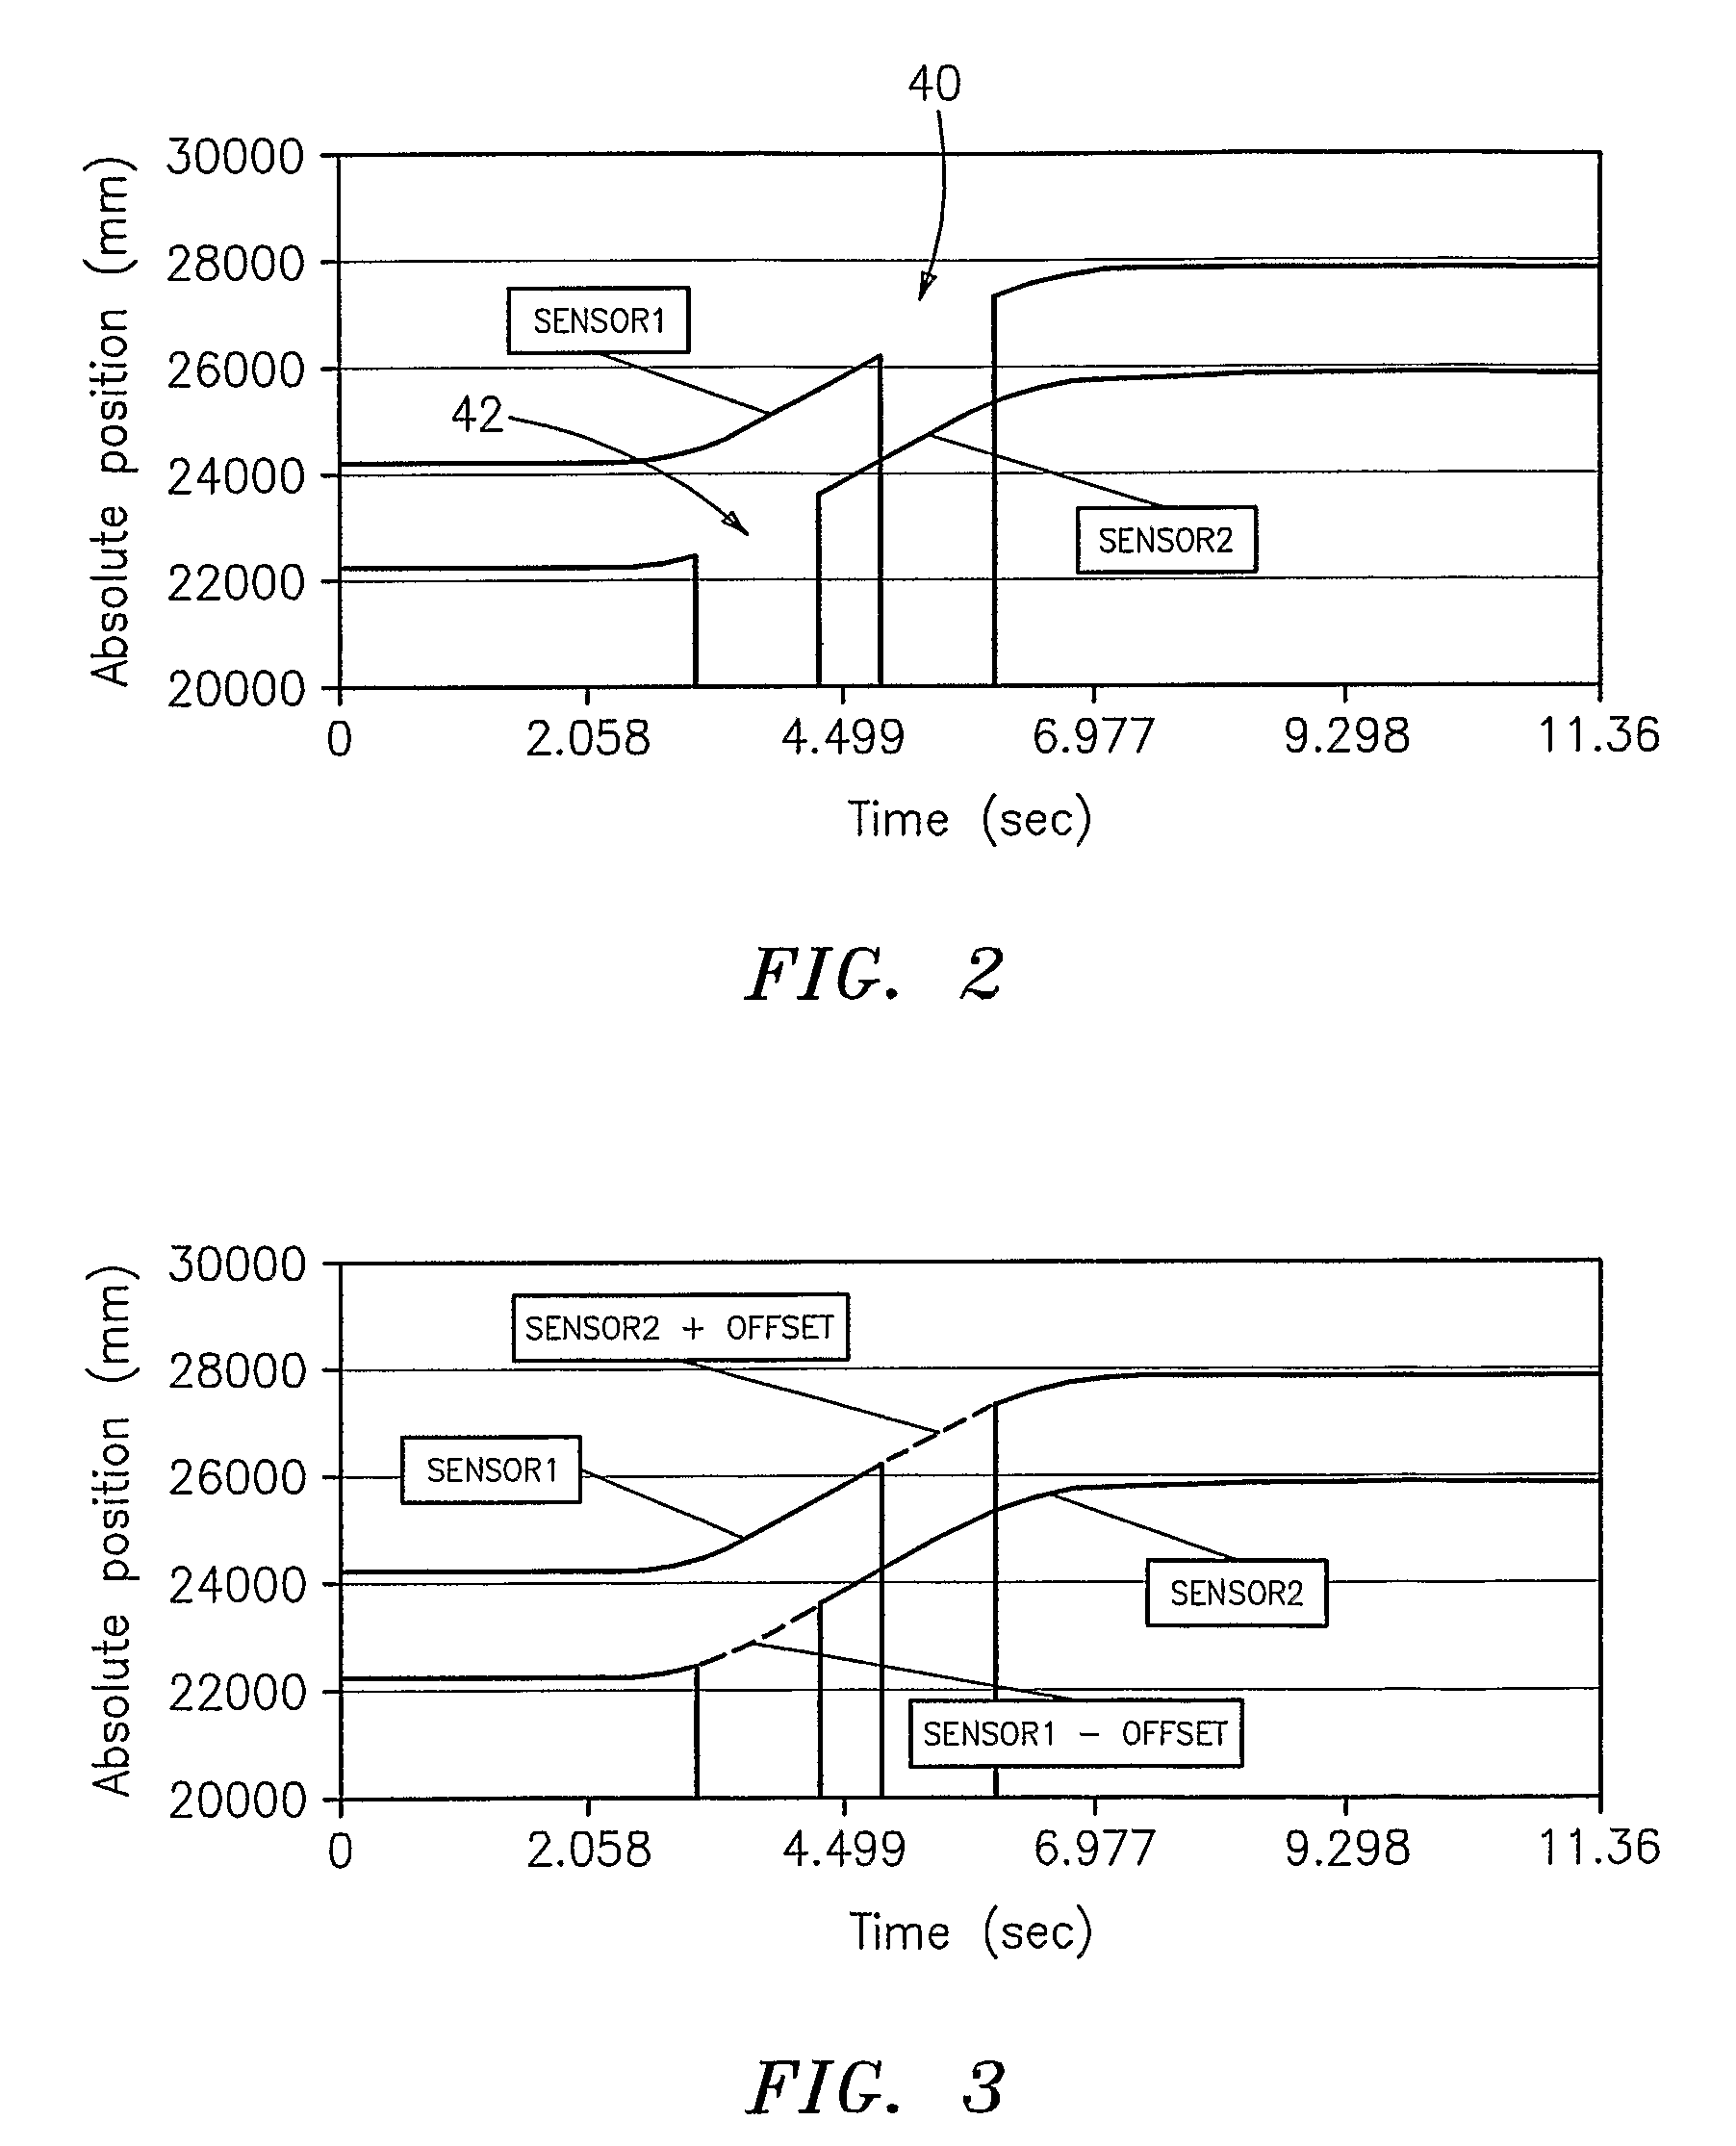 Elevator car position determining system and method using a signal filling technique